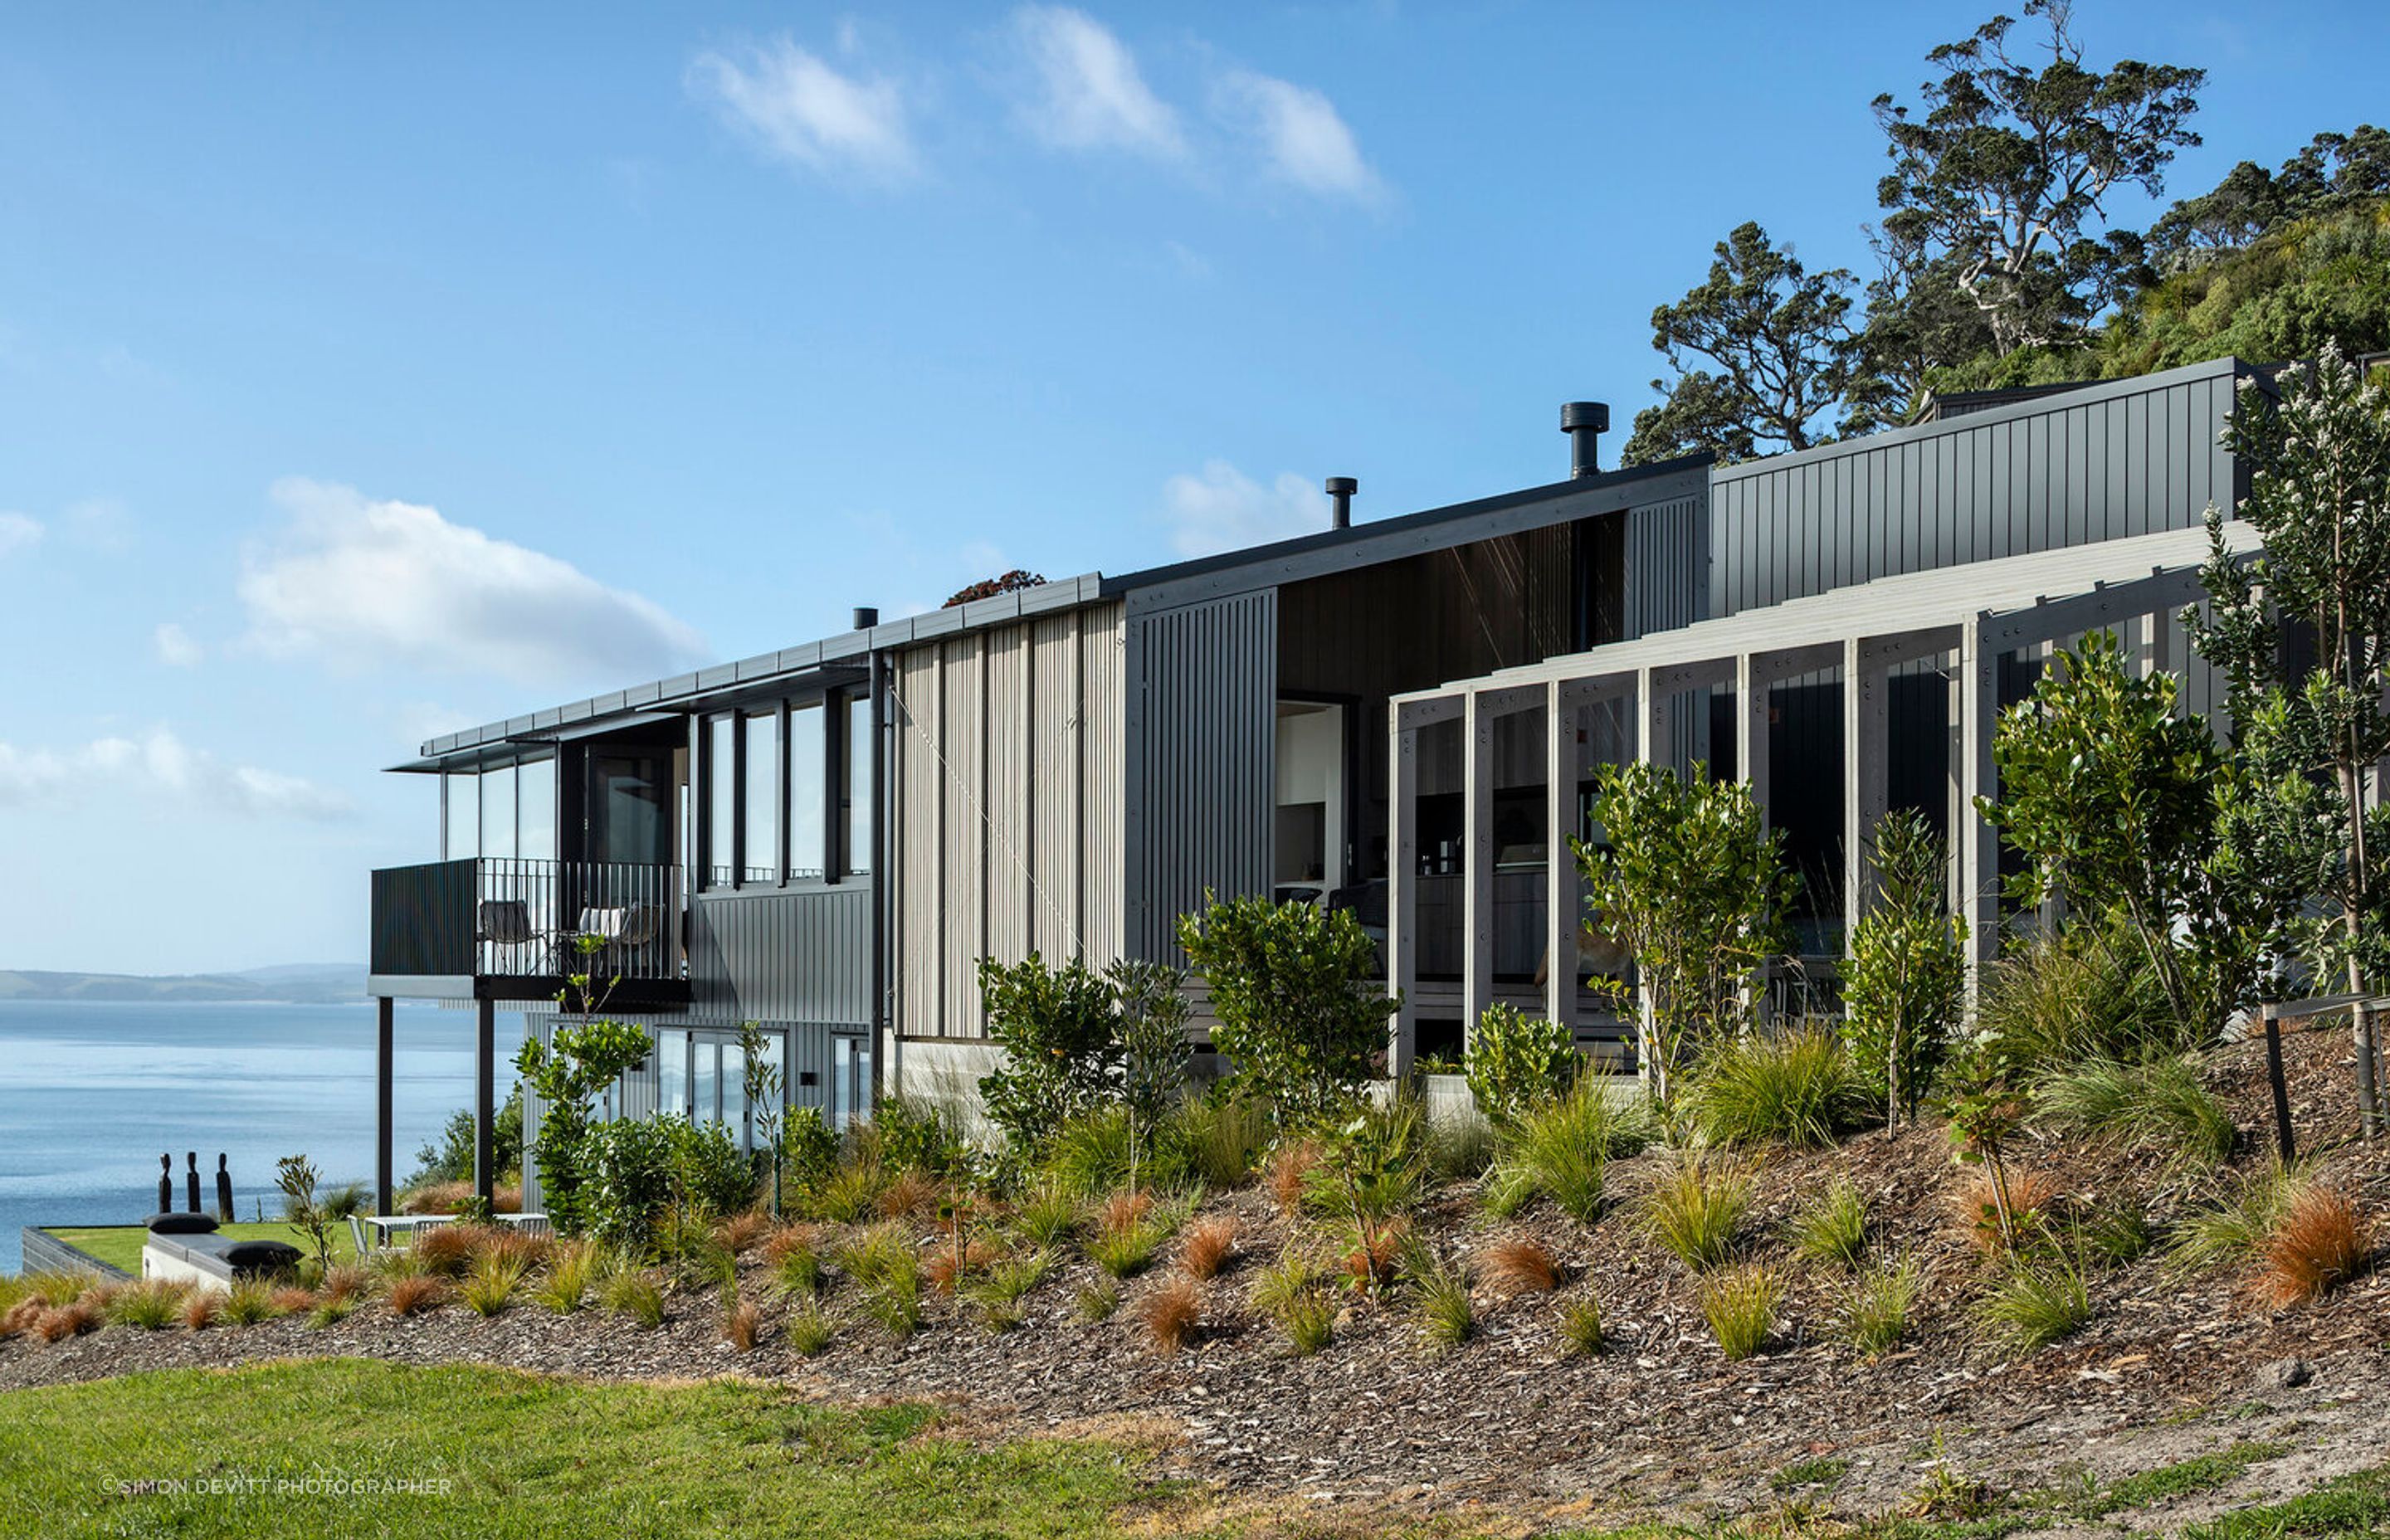 Located on an elevated section overlooking Daniels Reef north of Auckland, this new house enjoys enjoys extensive sea views across to Little Barrier Island.